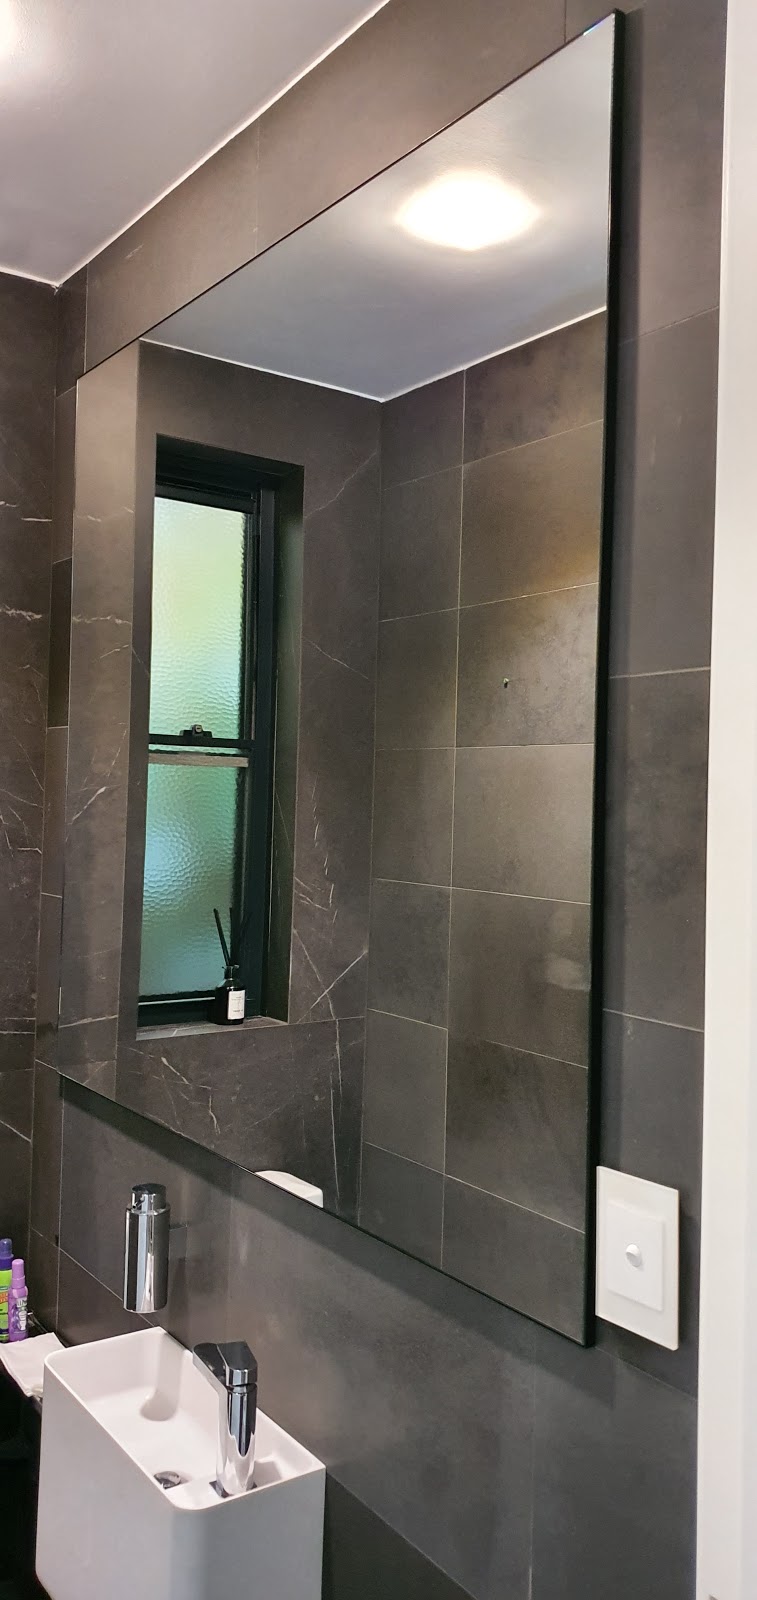 EASTERN SUBURBS SHOWERSCREENS | store | 373A Arden St, South Coogee NSW 2034, Australia | 0418292355 OR +61 418 292 355